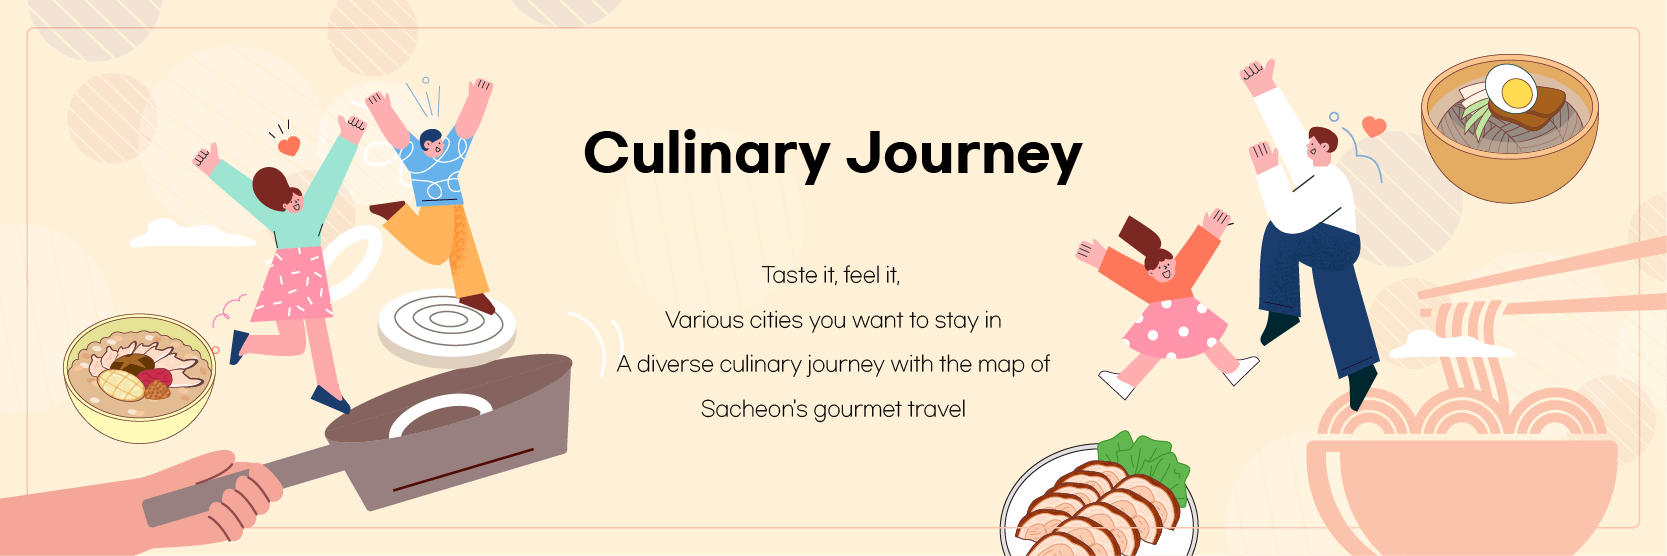 Culinary Journey - Taste it, feel it, Various cities you want to stay in A diverse culinary journey with the map of Sacheon's gourmet travel